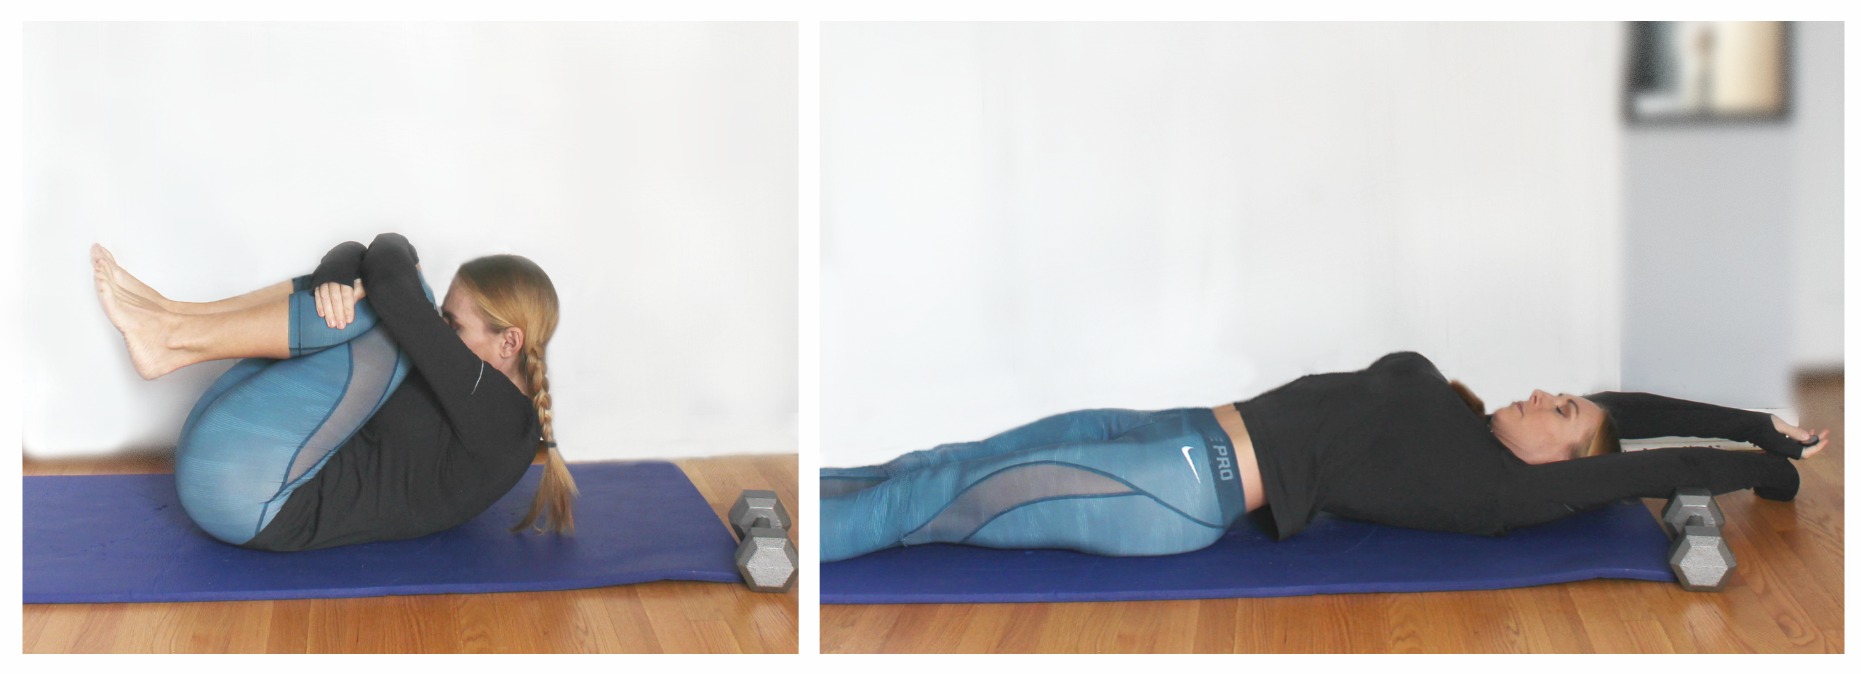 These 5 Body Stretches Stop Stress Instantly – Jenny at dapperhouse